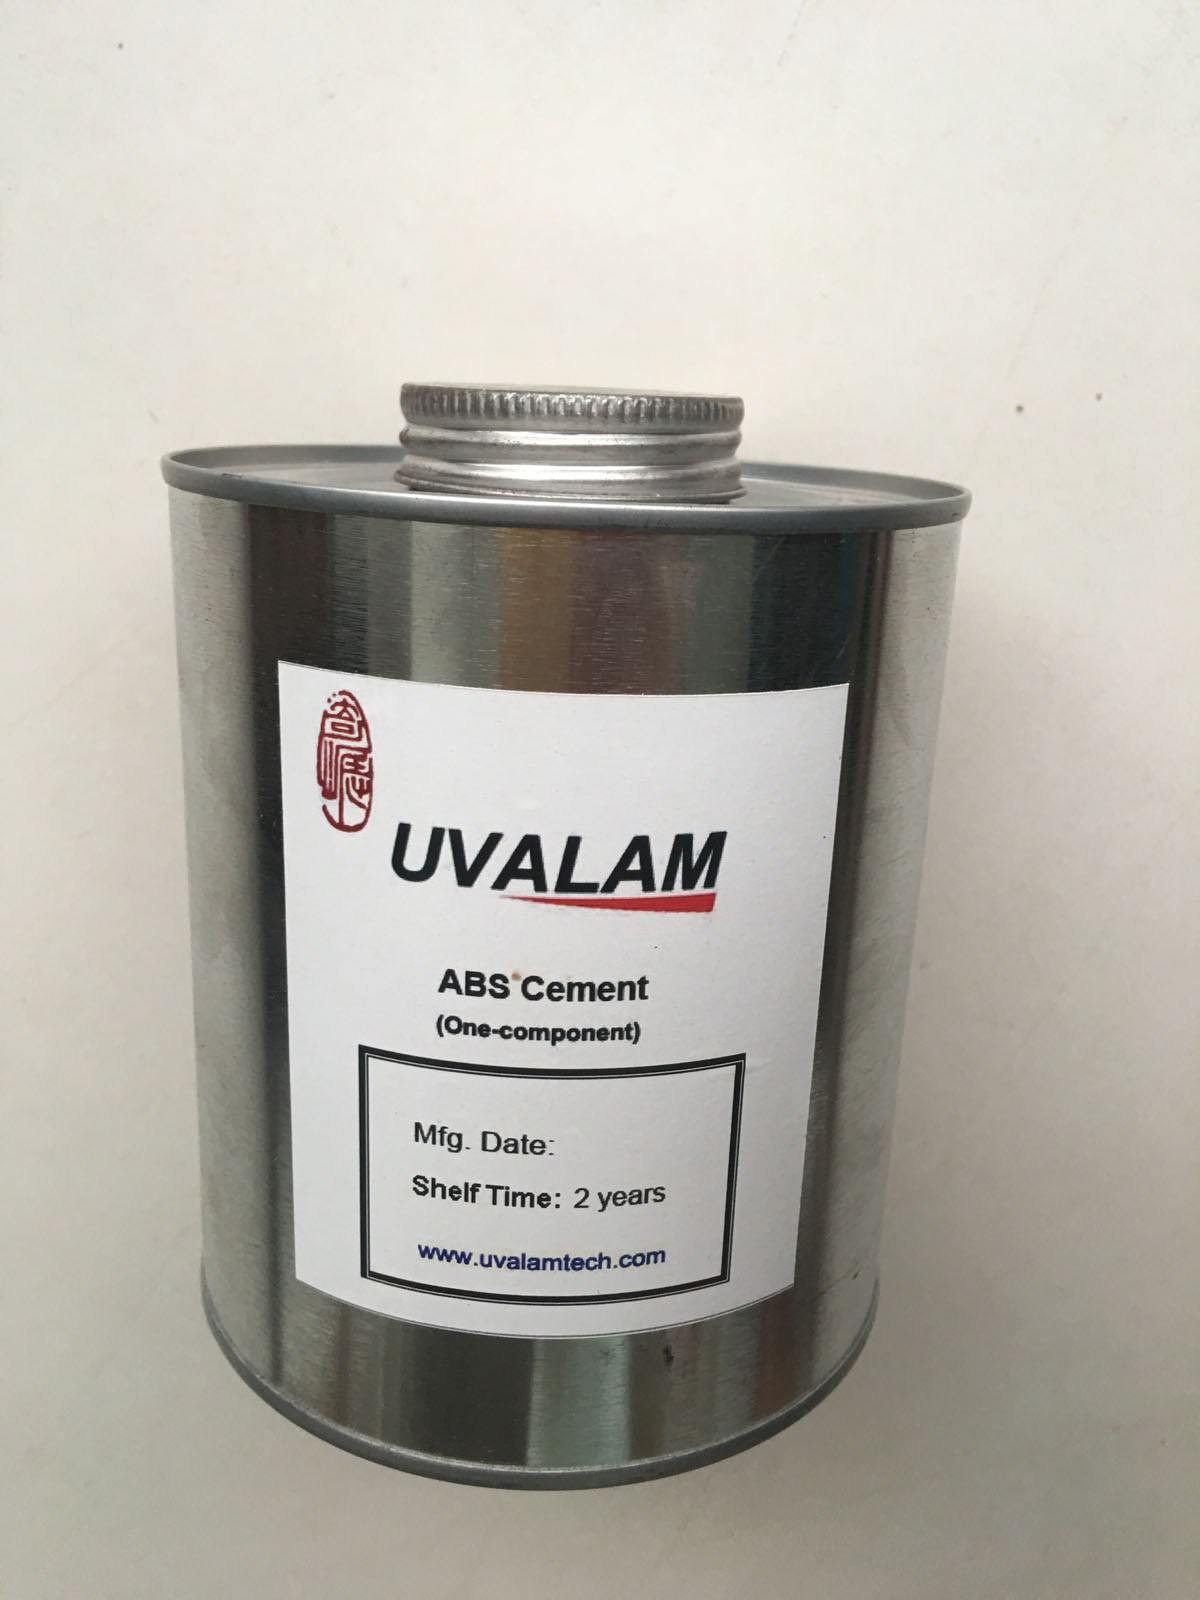 ABS solvent cement